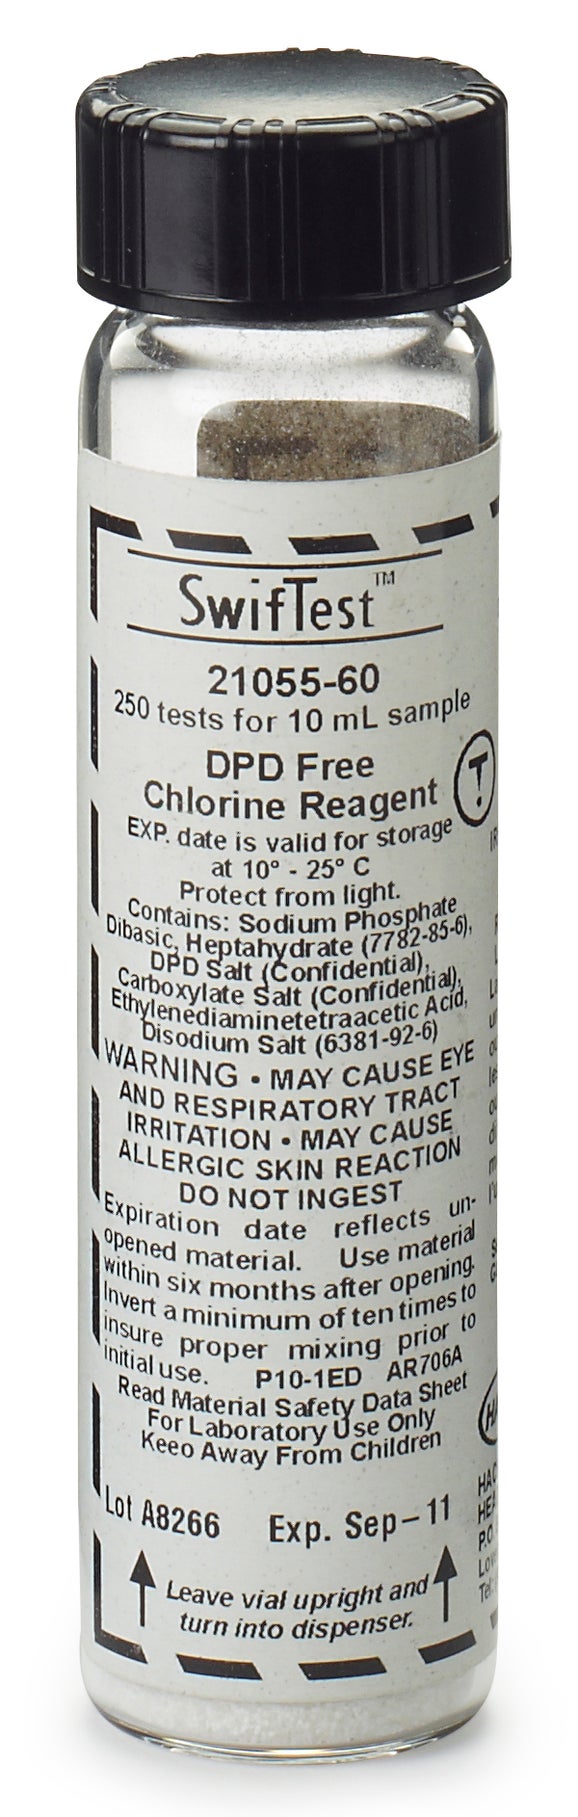 DPD Free Chlorine Reagent, Swiftest™ Dispenser Refill Vial, Approximately 250 Tests